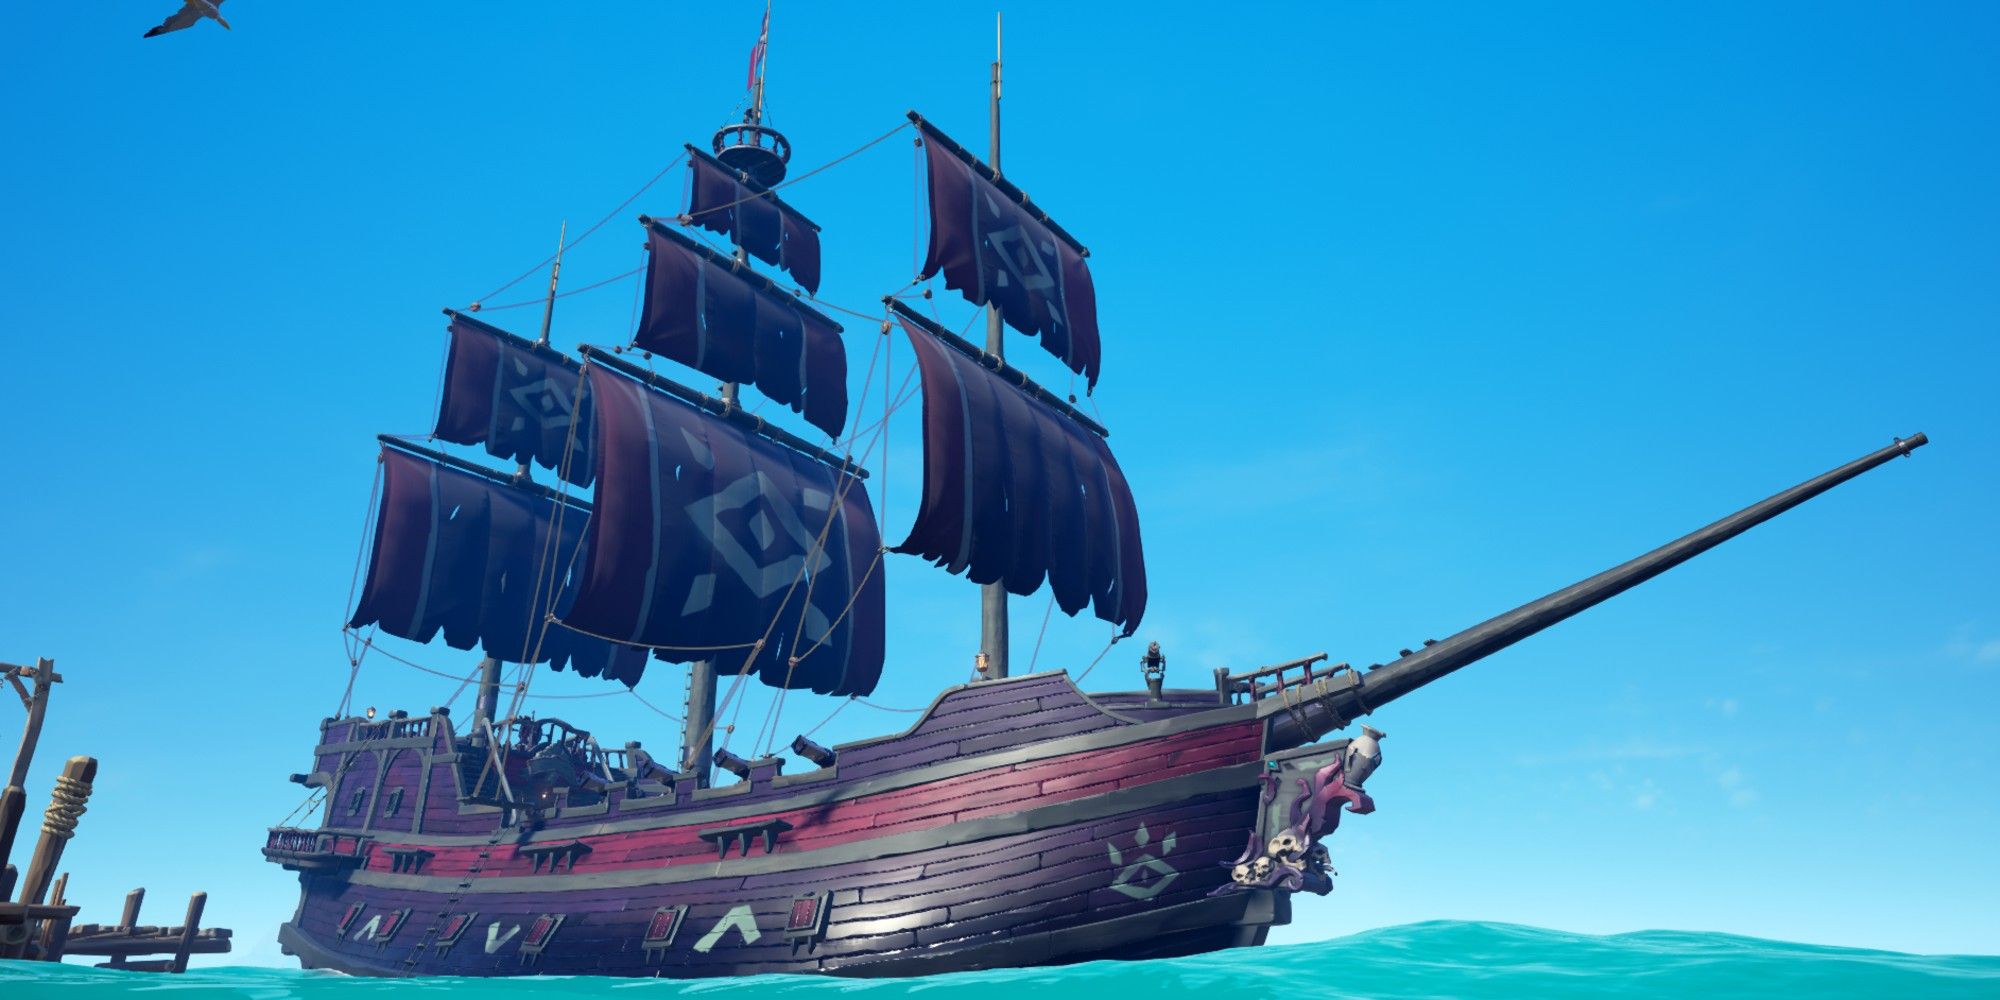 sea of thieves order of souls ship set, ship sailing on the ocean